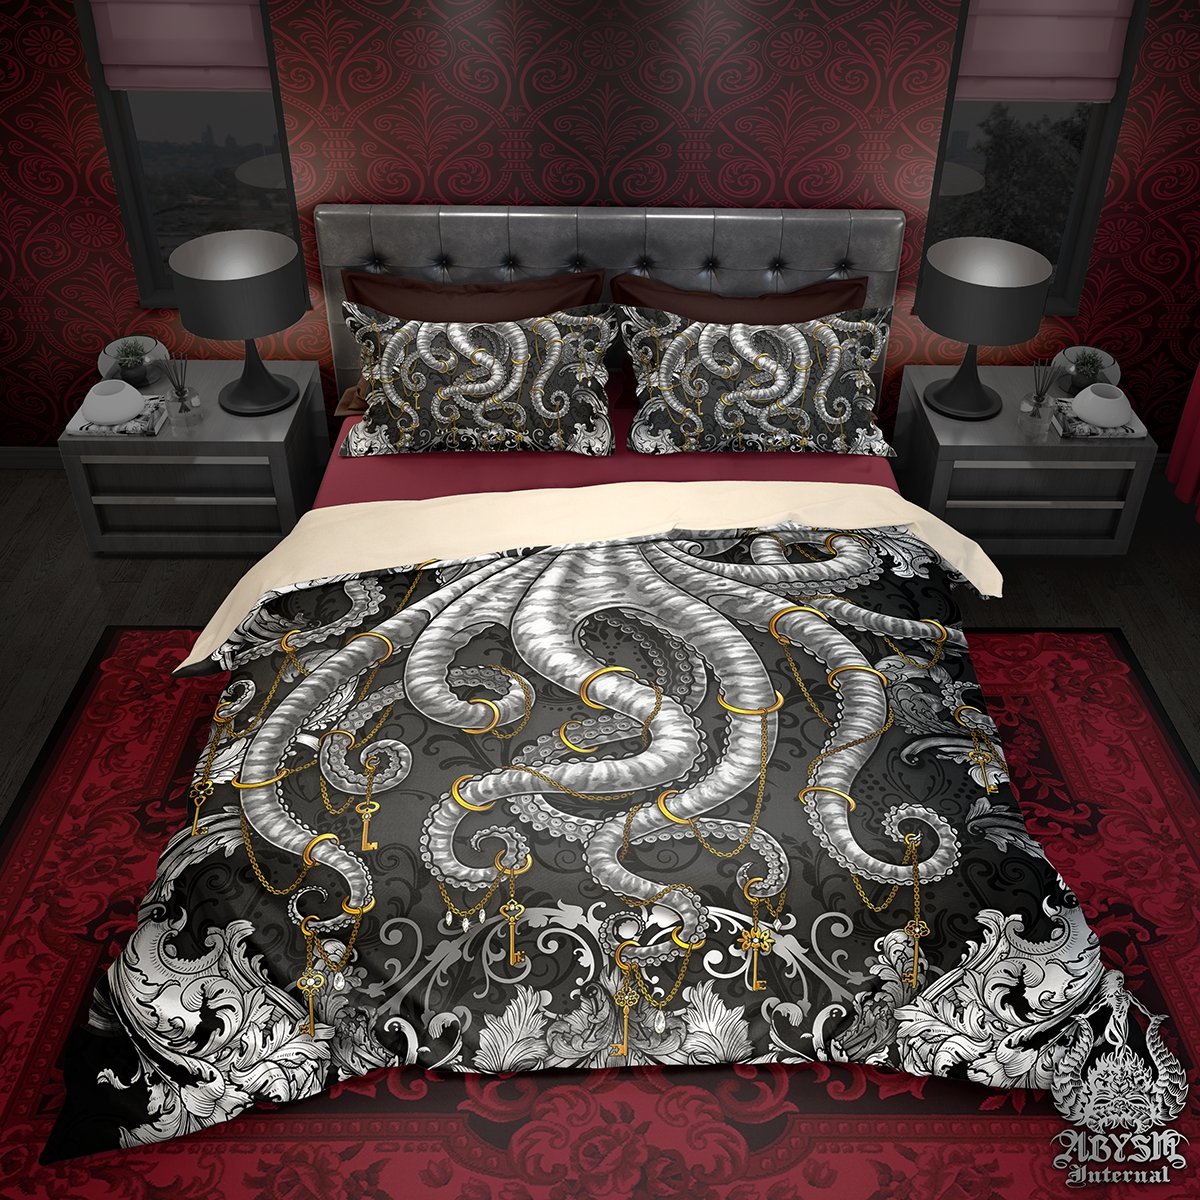 Octopus Bedding Set, Comforter and Duvet, Alternative Bed Cover, Coastal Bedroom Decor, King, Queen and Twin Size - Silver and Black - Abysm Internal